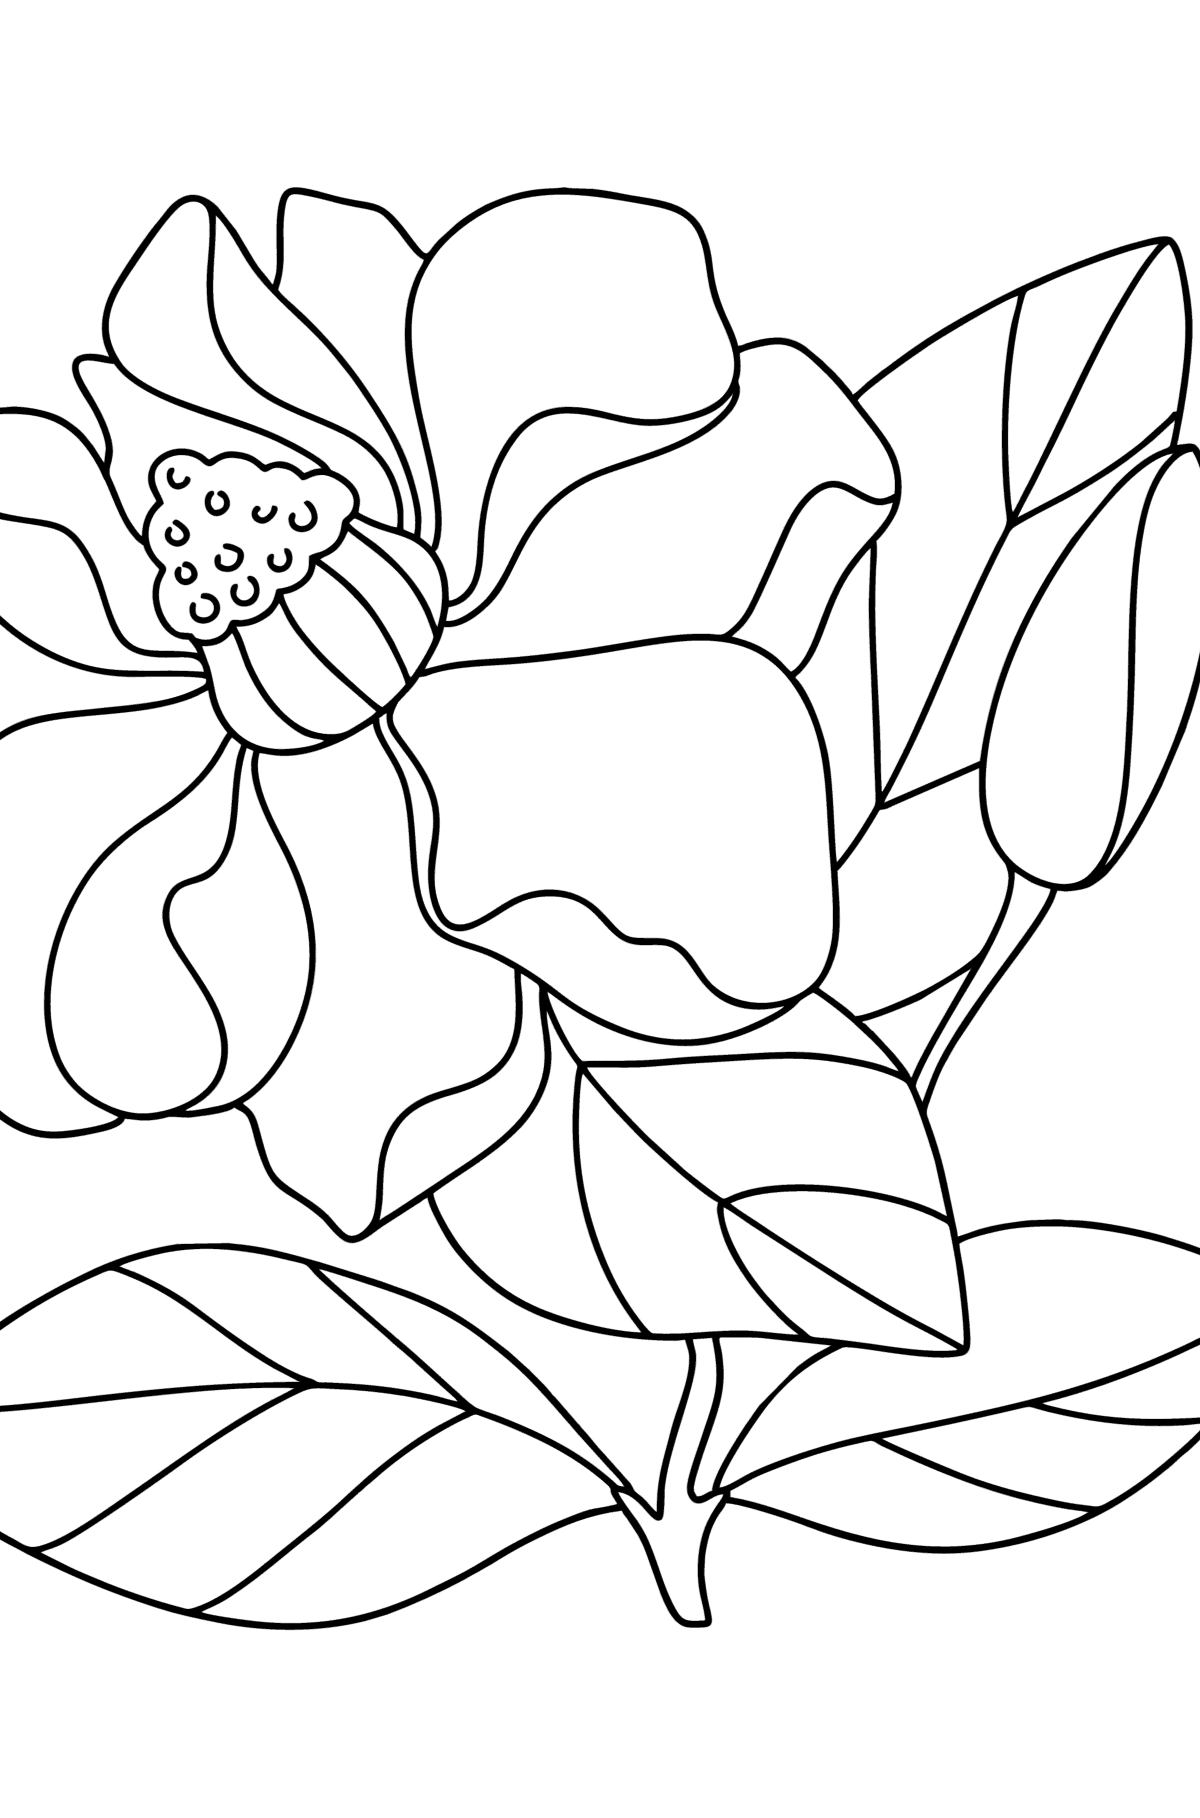 Flowers Coloring Pages   Printable for Free, and Color Online